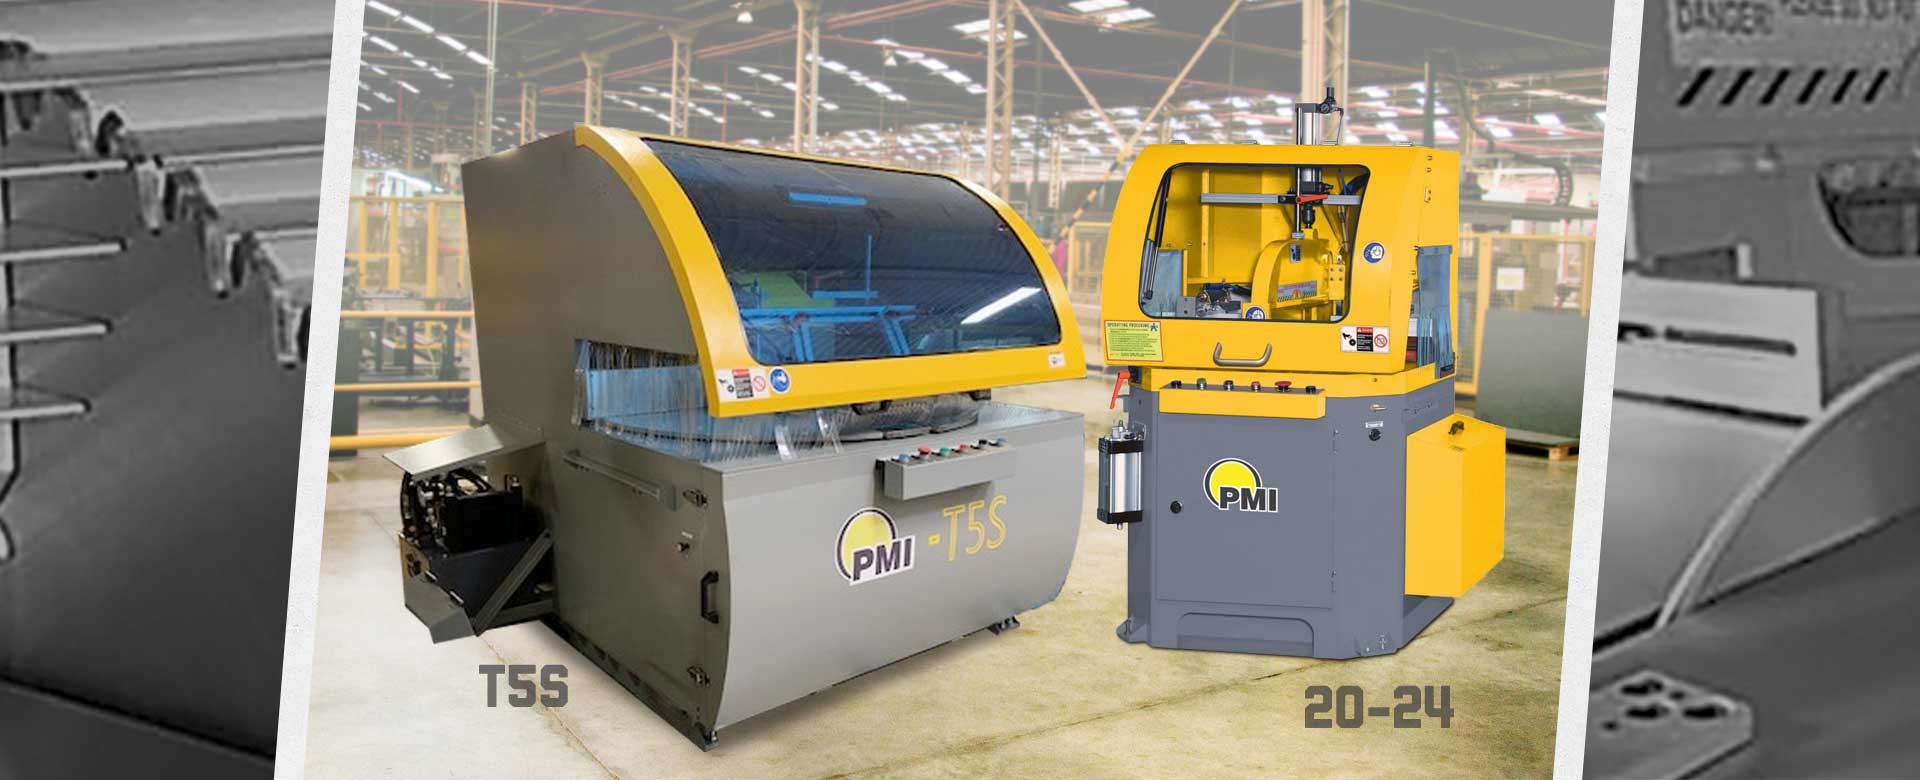 Gulf States Saw & Machine Co. offers automatic circular upcut saws from PMI, such as the PMI T5S & 20-24, in multiple models and configurations.